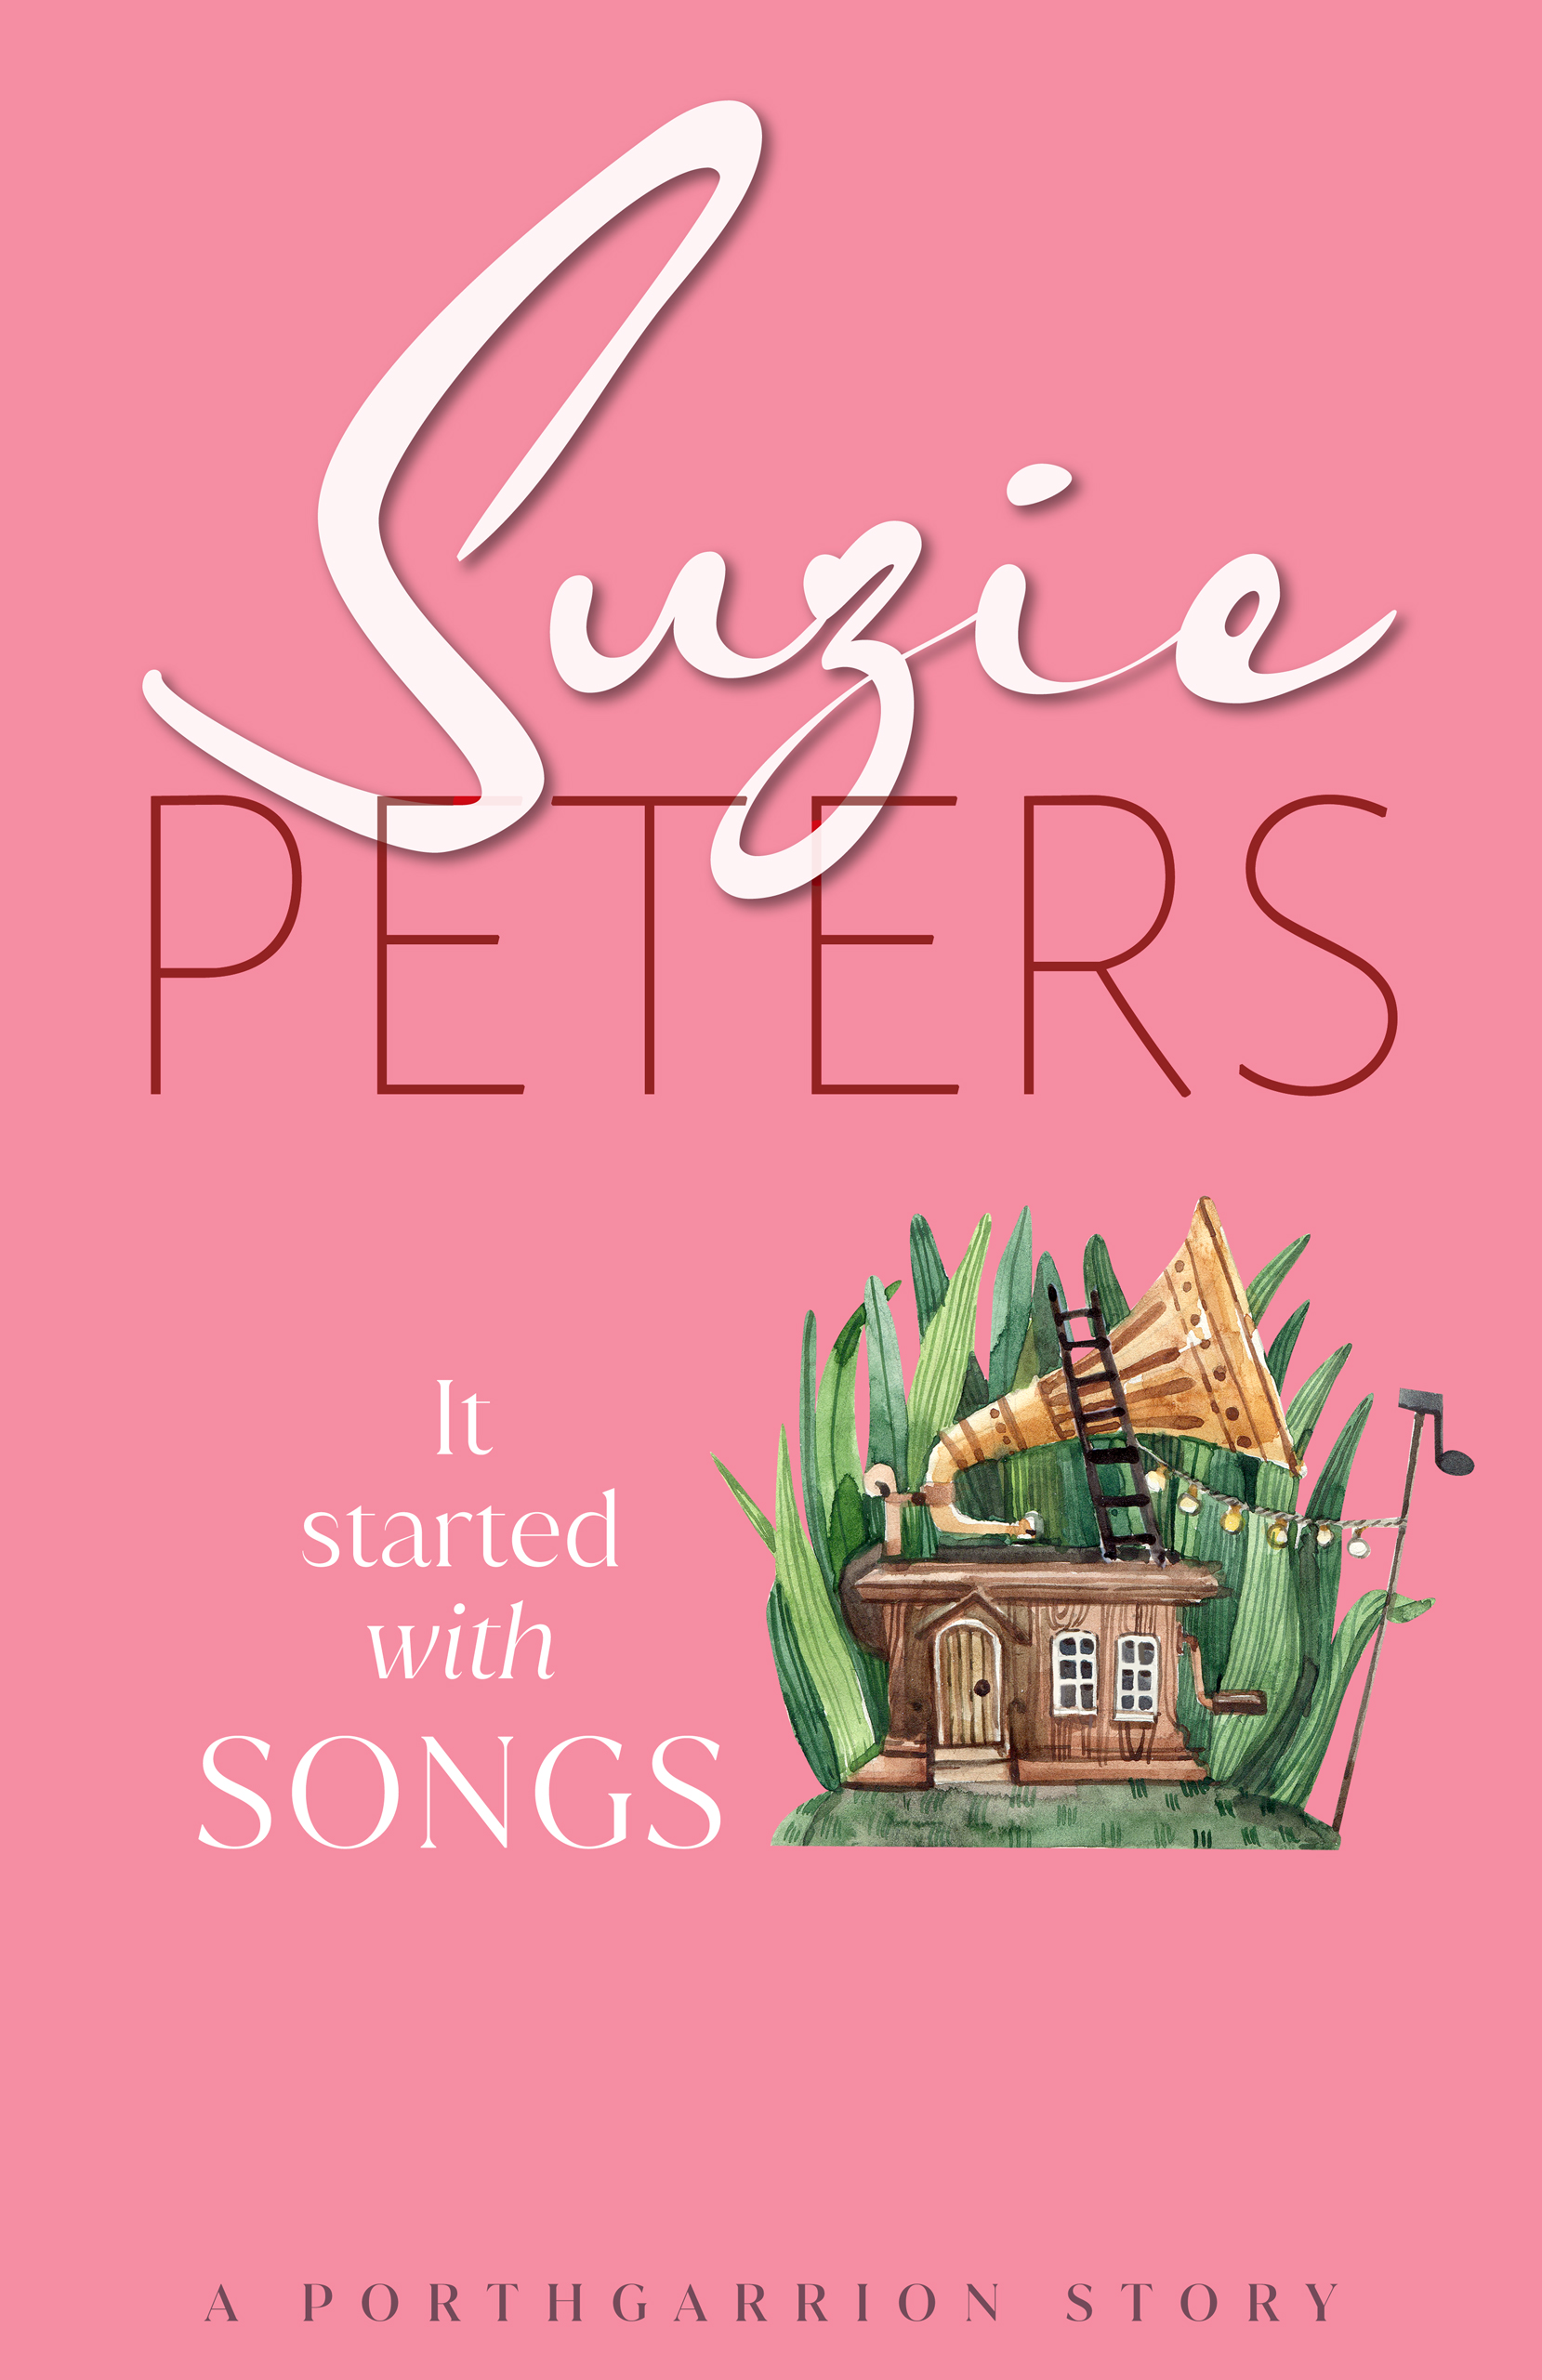 Porthgarrion Series: It Started with Songs by Suzie Peters.